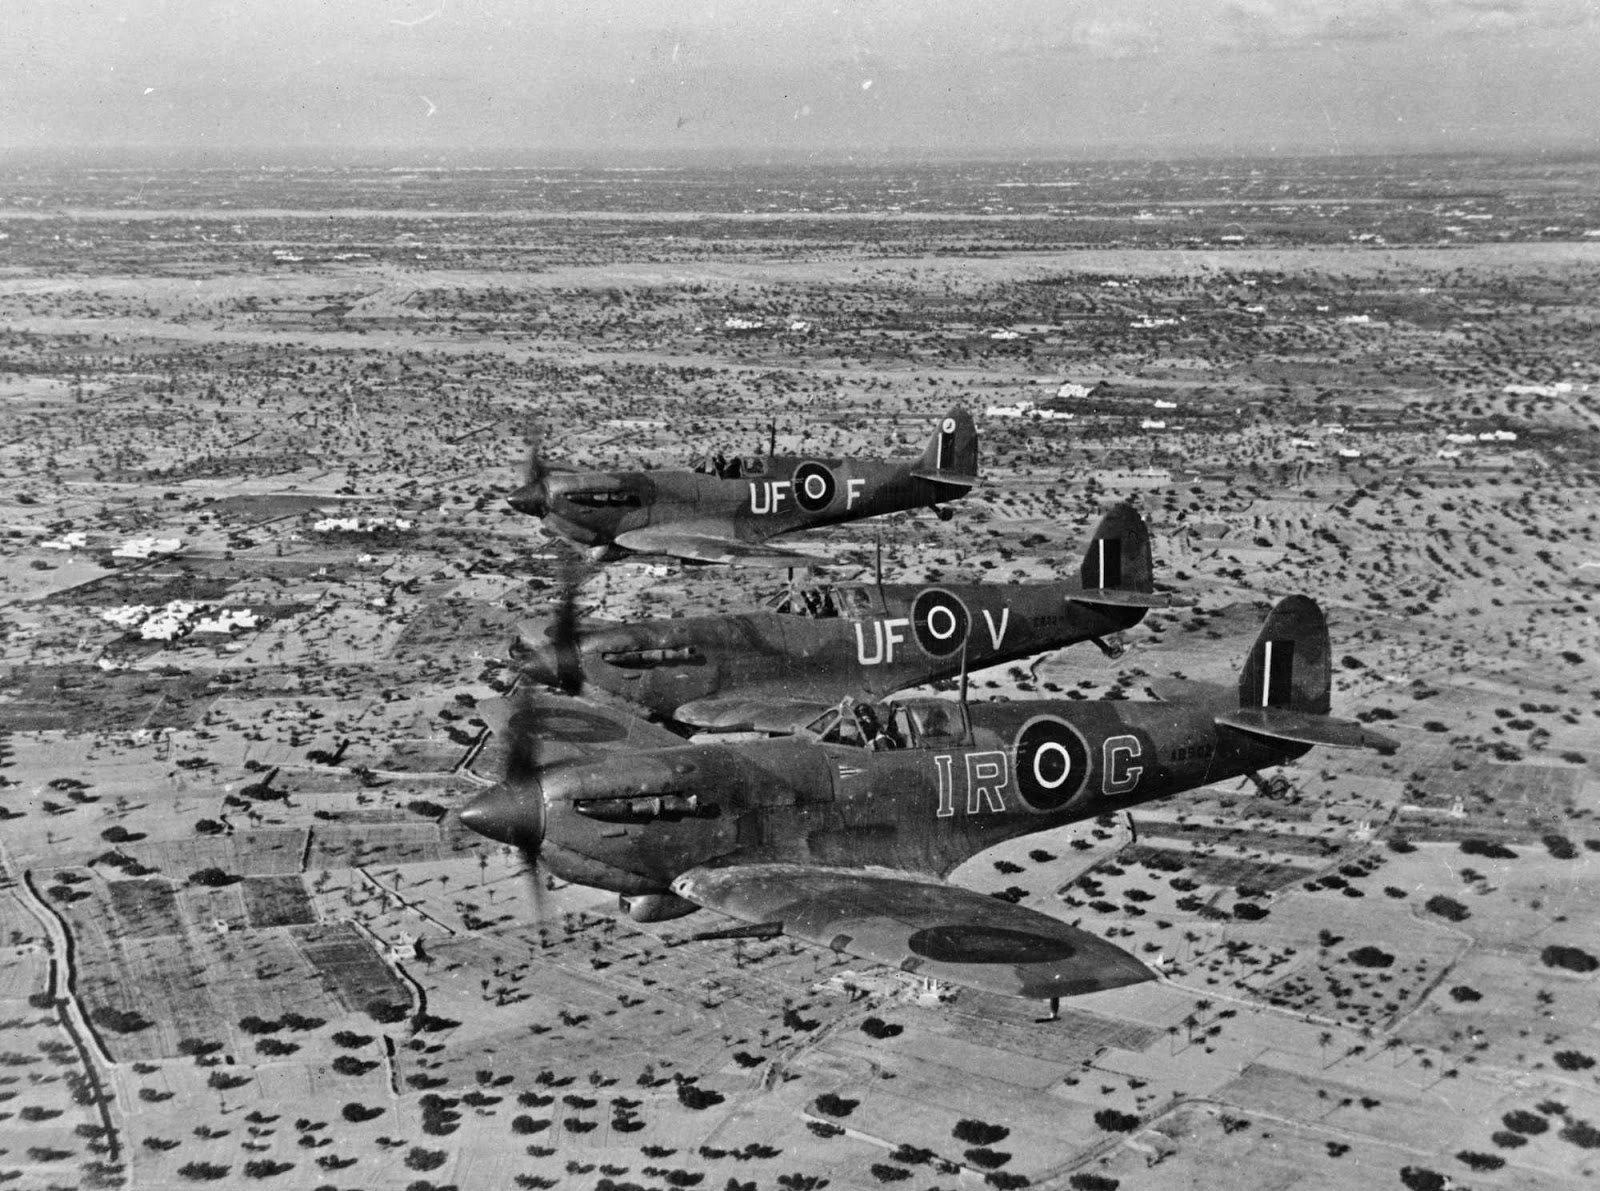 A+formation+of+Spitfires+on+interception+patrol+over+De+Djerba+Island,+off+Gabes,+on+their+way+to+the+Mareth+Line+area,+1943.jpg